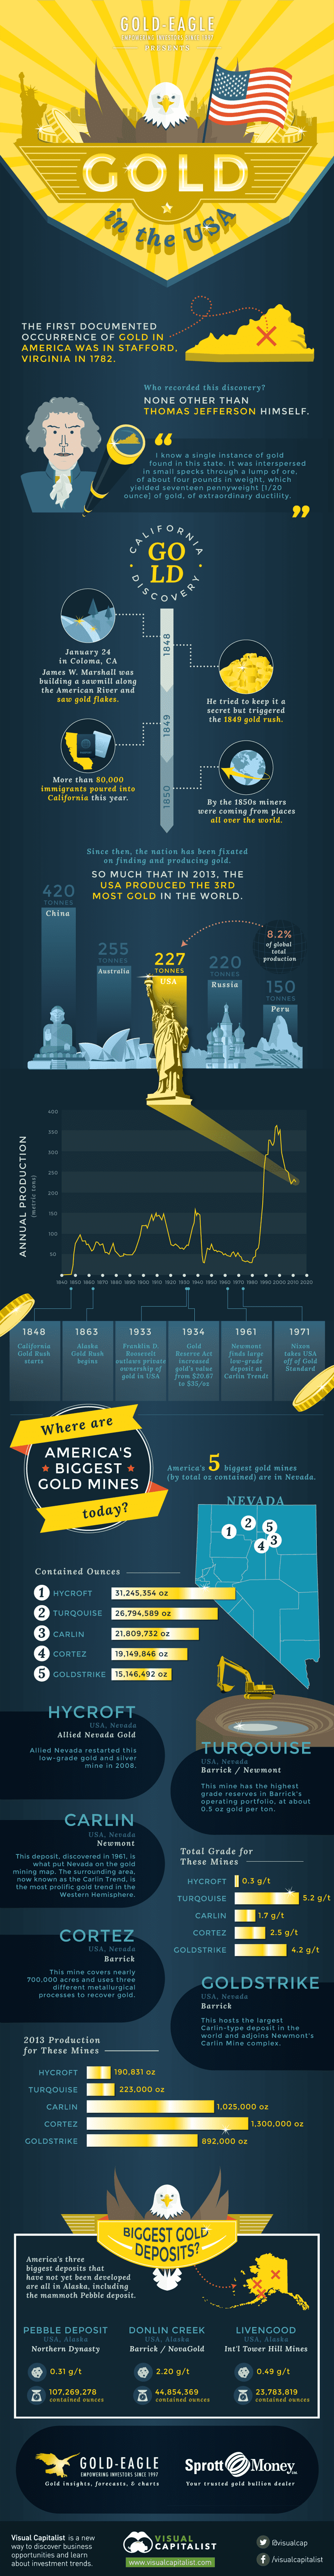 gold-in-usa-infographic